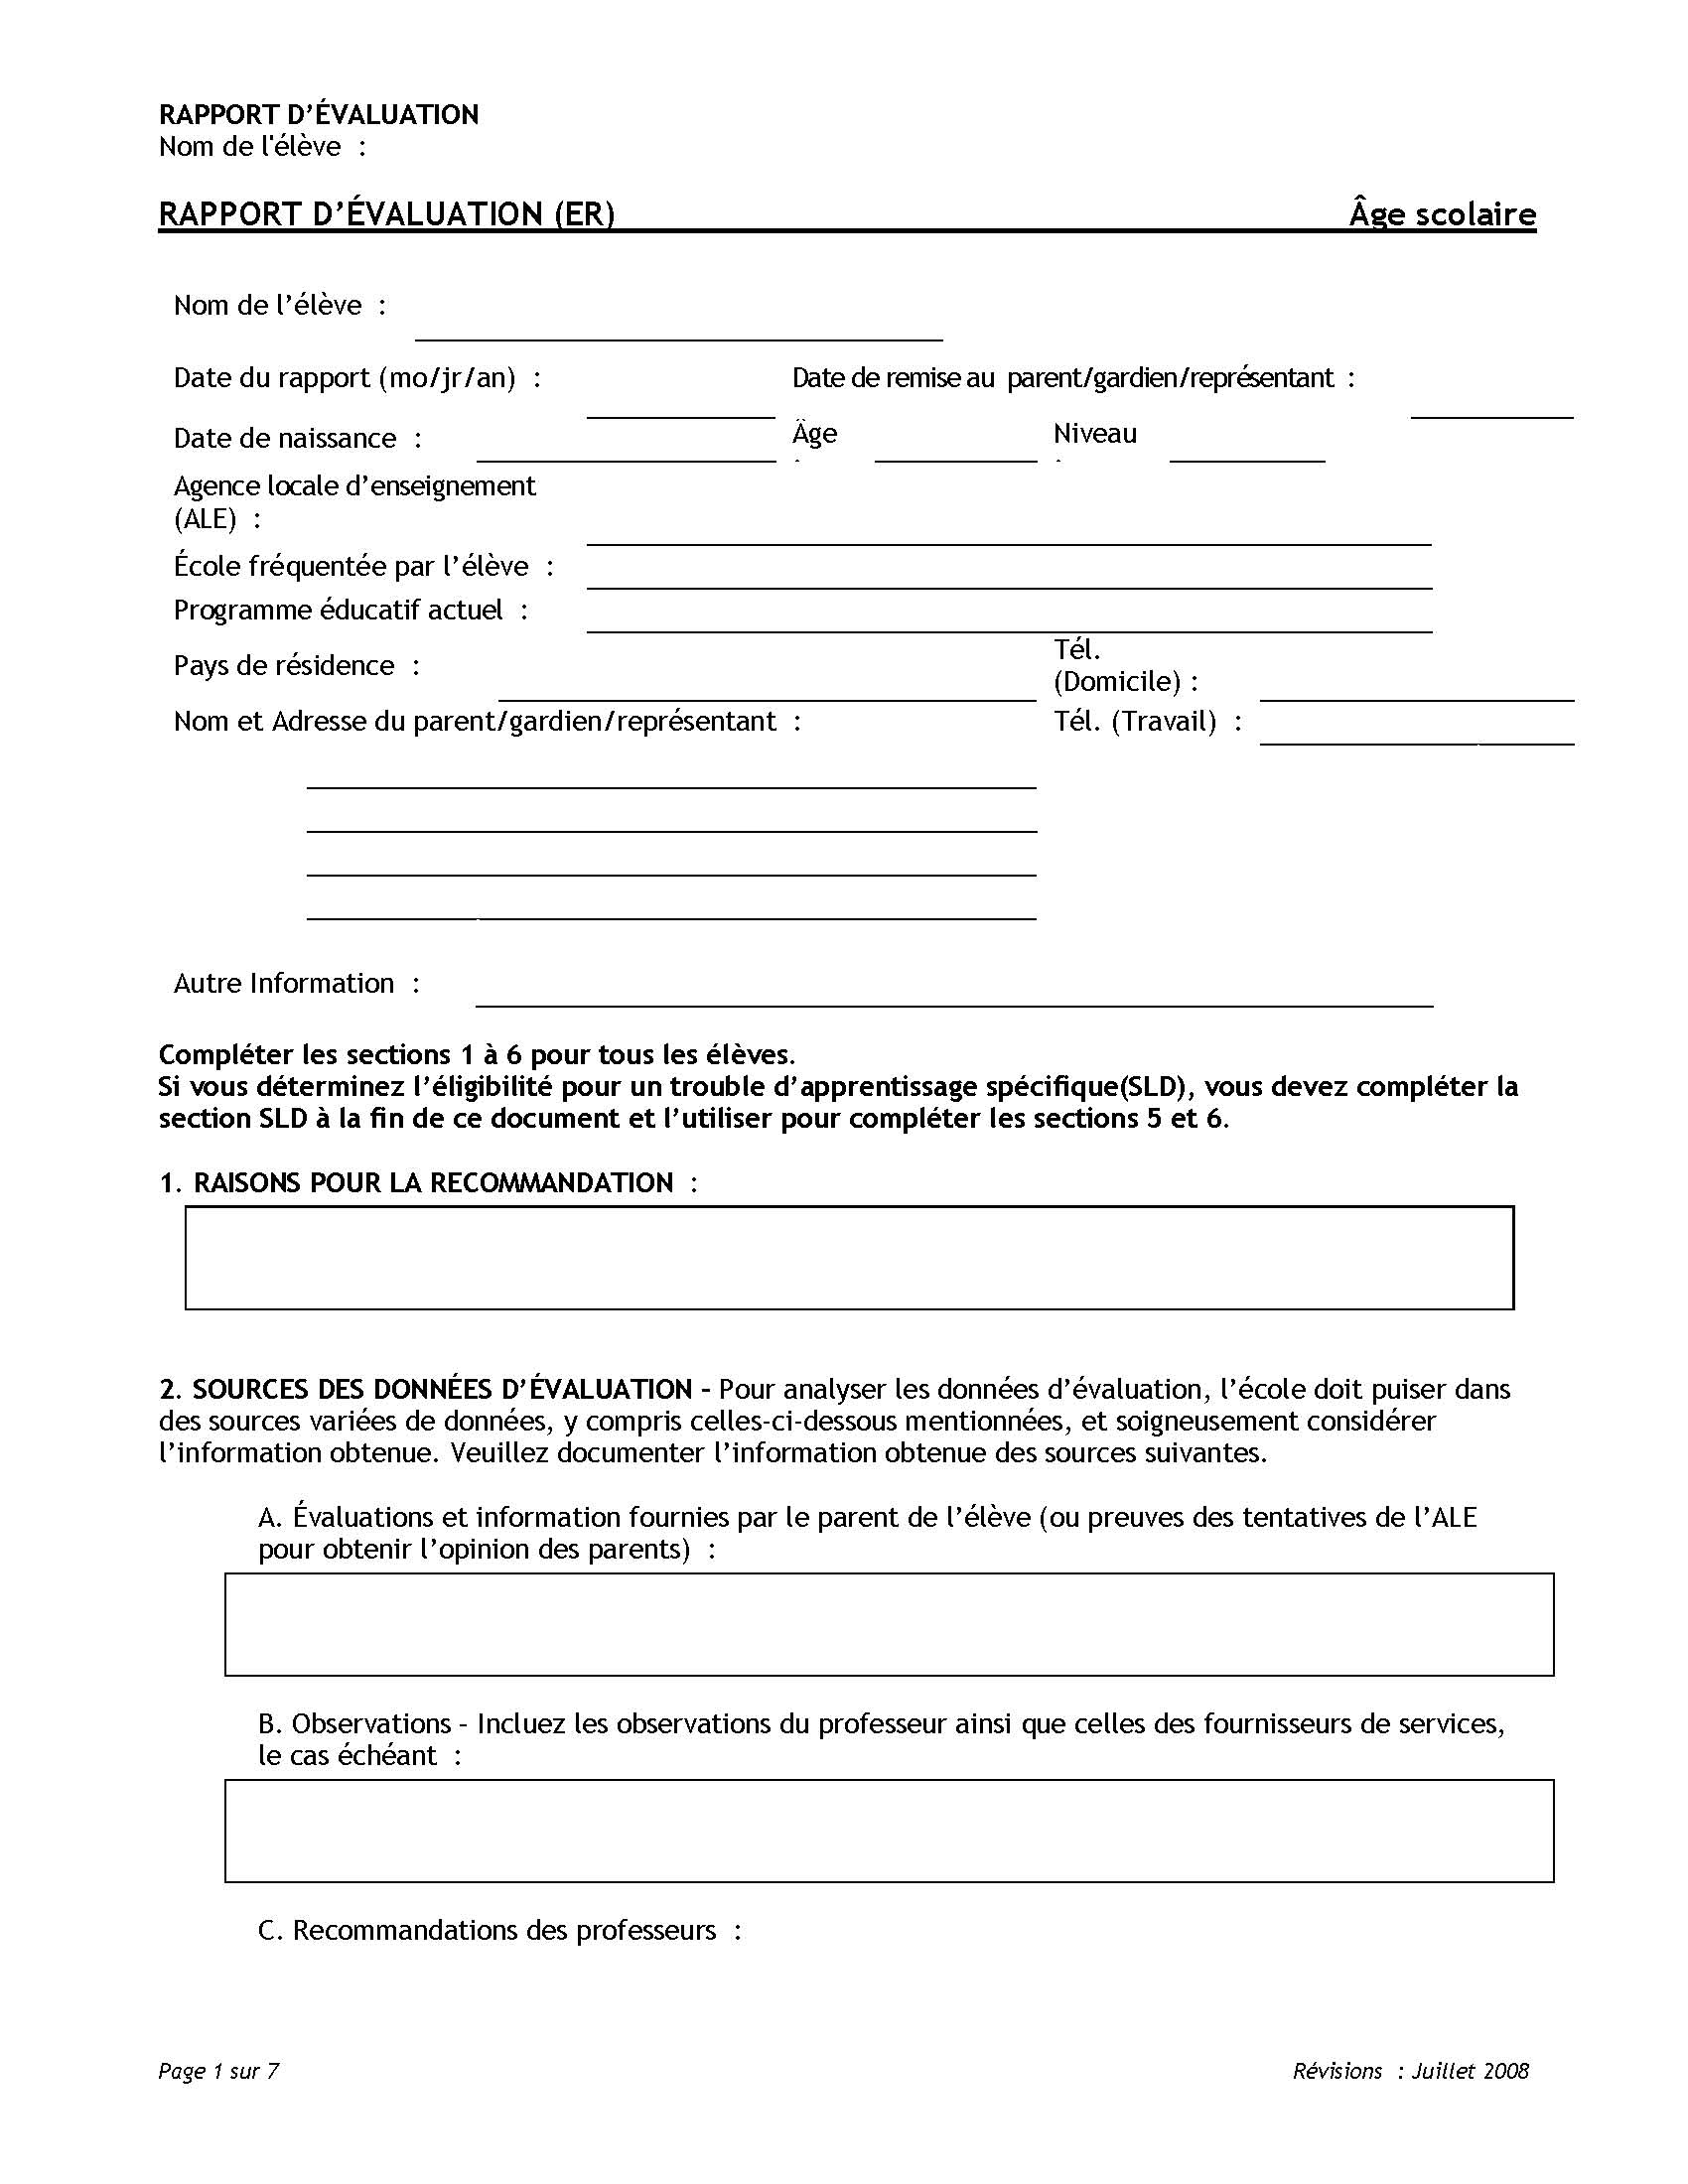 EVALUATION REPORT (ER) - School Age (French)